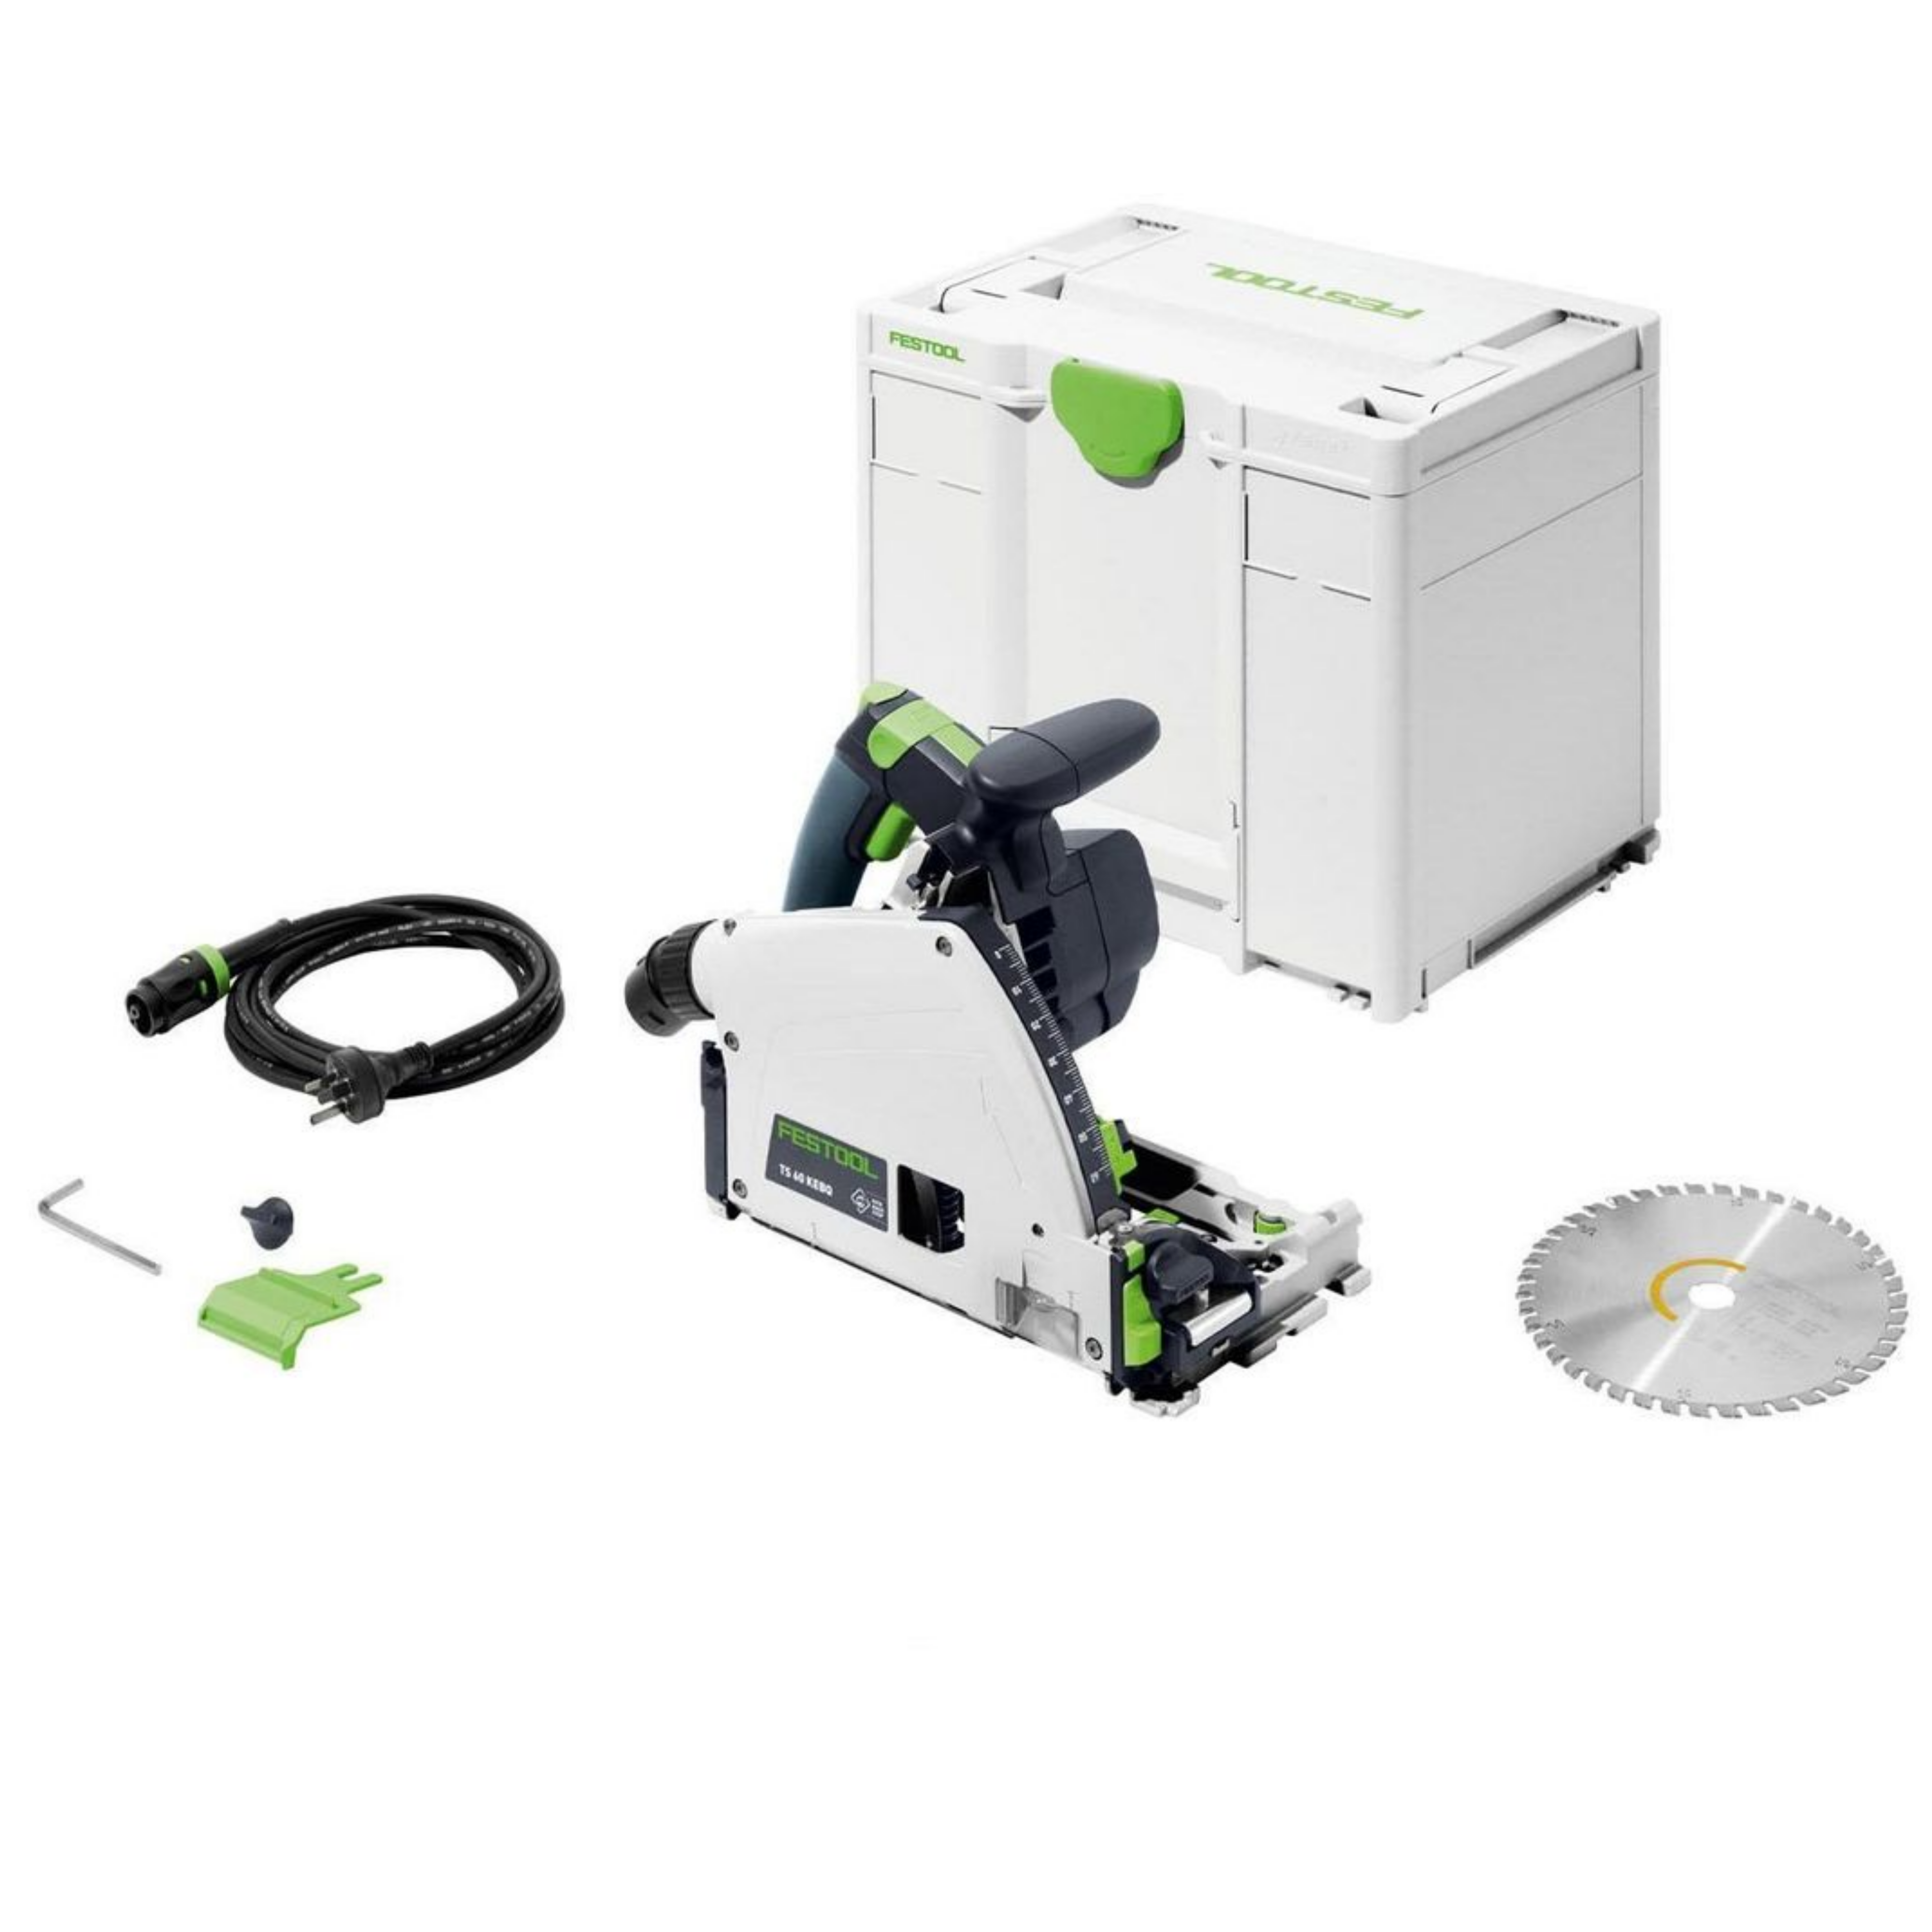 TS 60K 168mm Plunge Cut Saw in Systainer 576723 by Festool